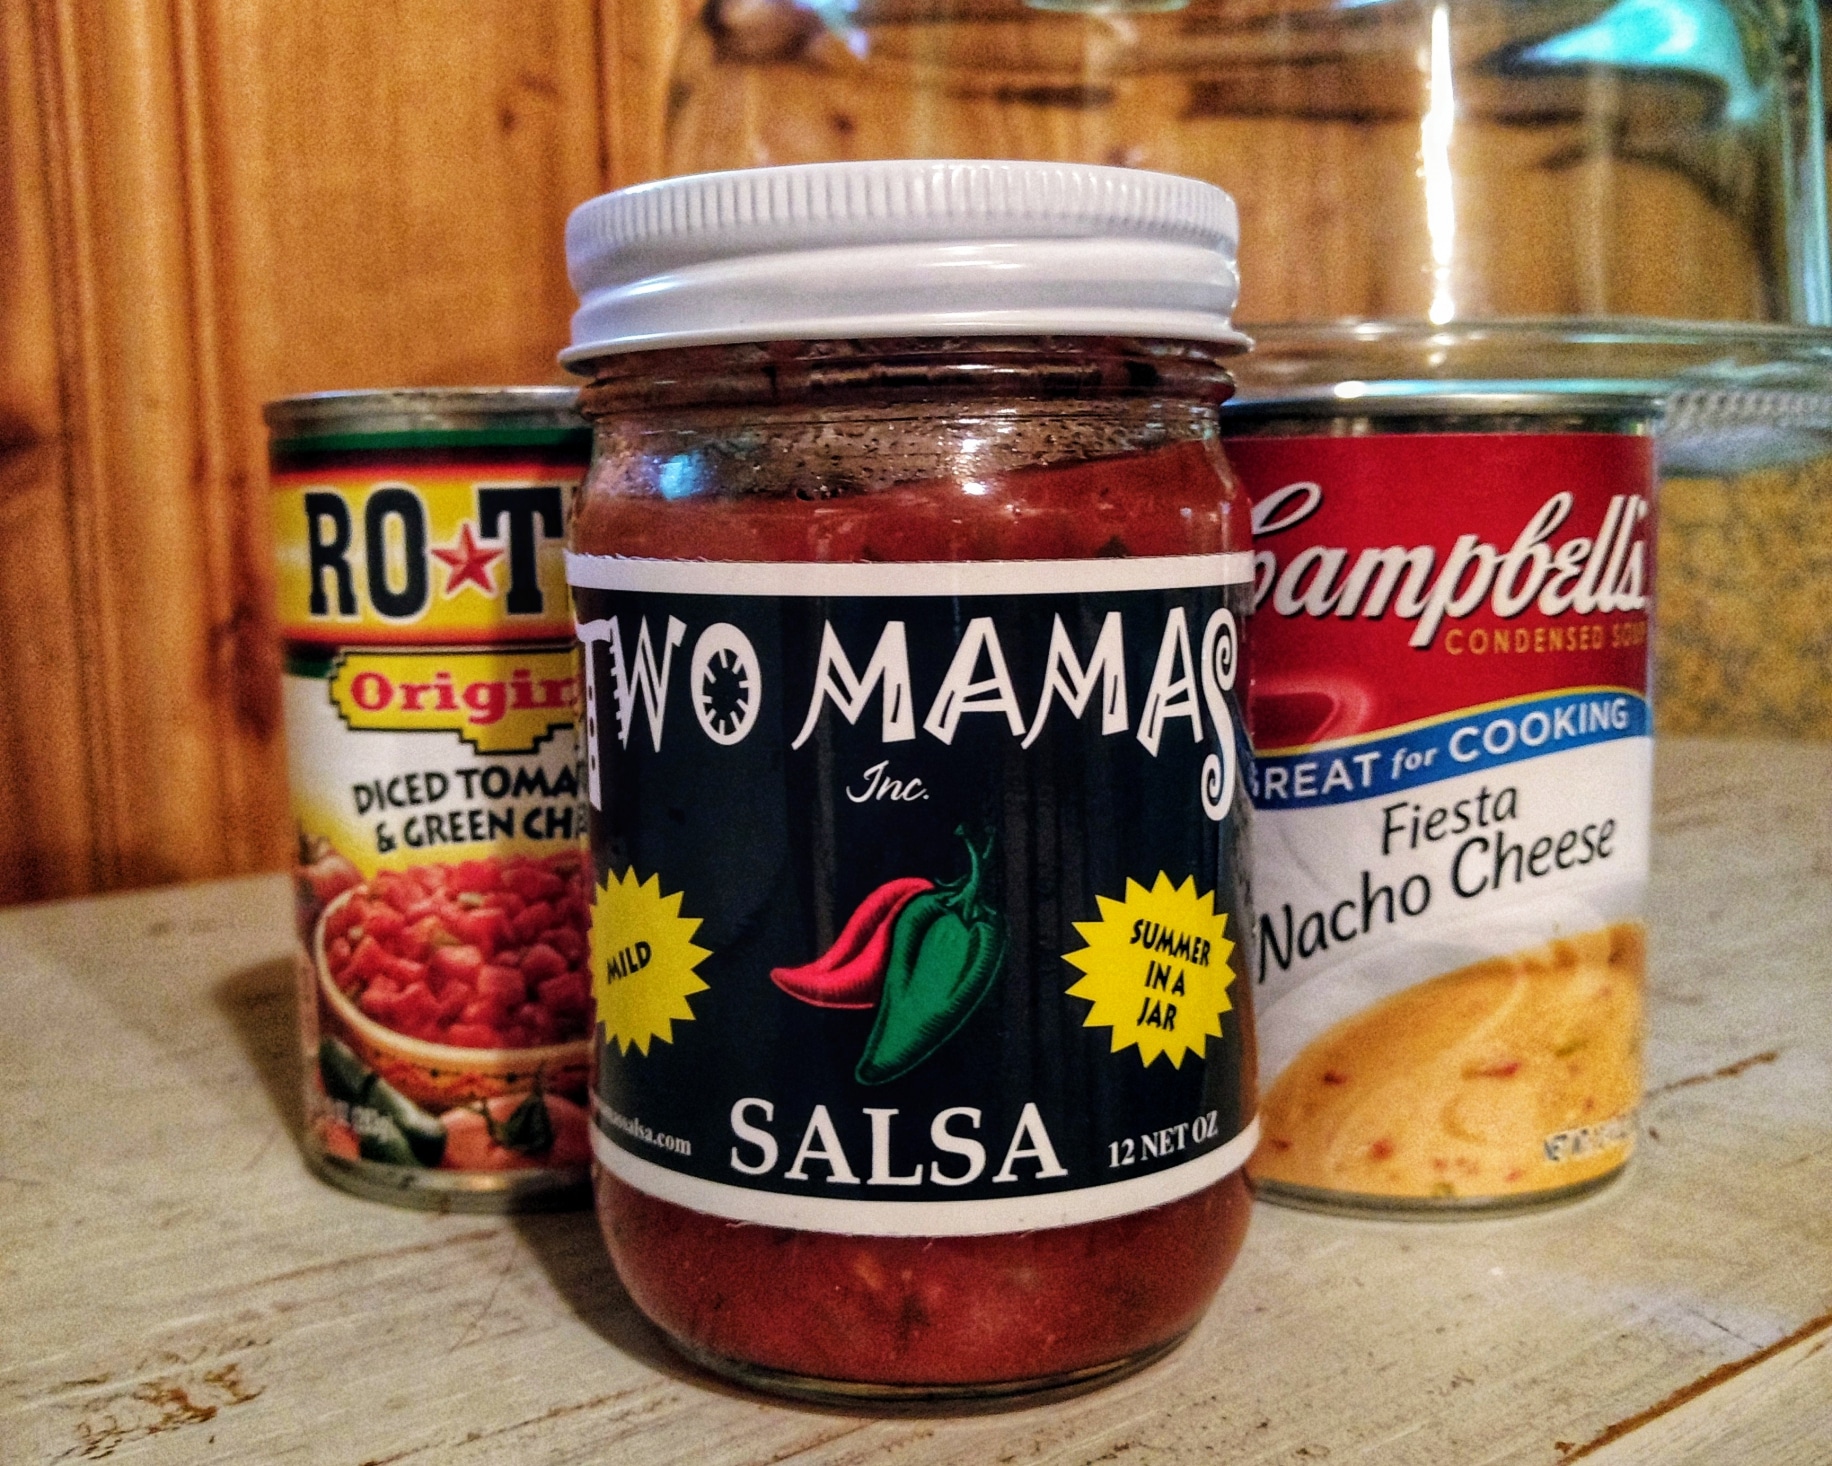 IMG 20181006 074534673 01 Try this easy Rotel cheese dip recipe that uses Two Mamas Salsa from the Piggly Wiggly on Clairmont Avenue in Birmingham